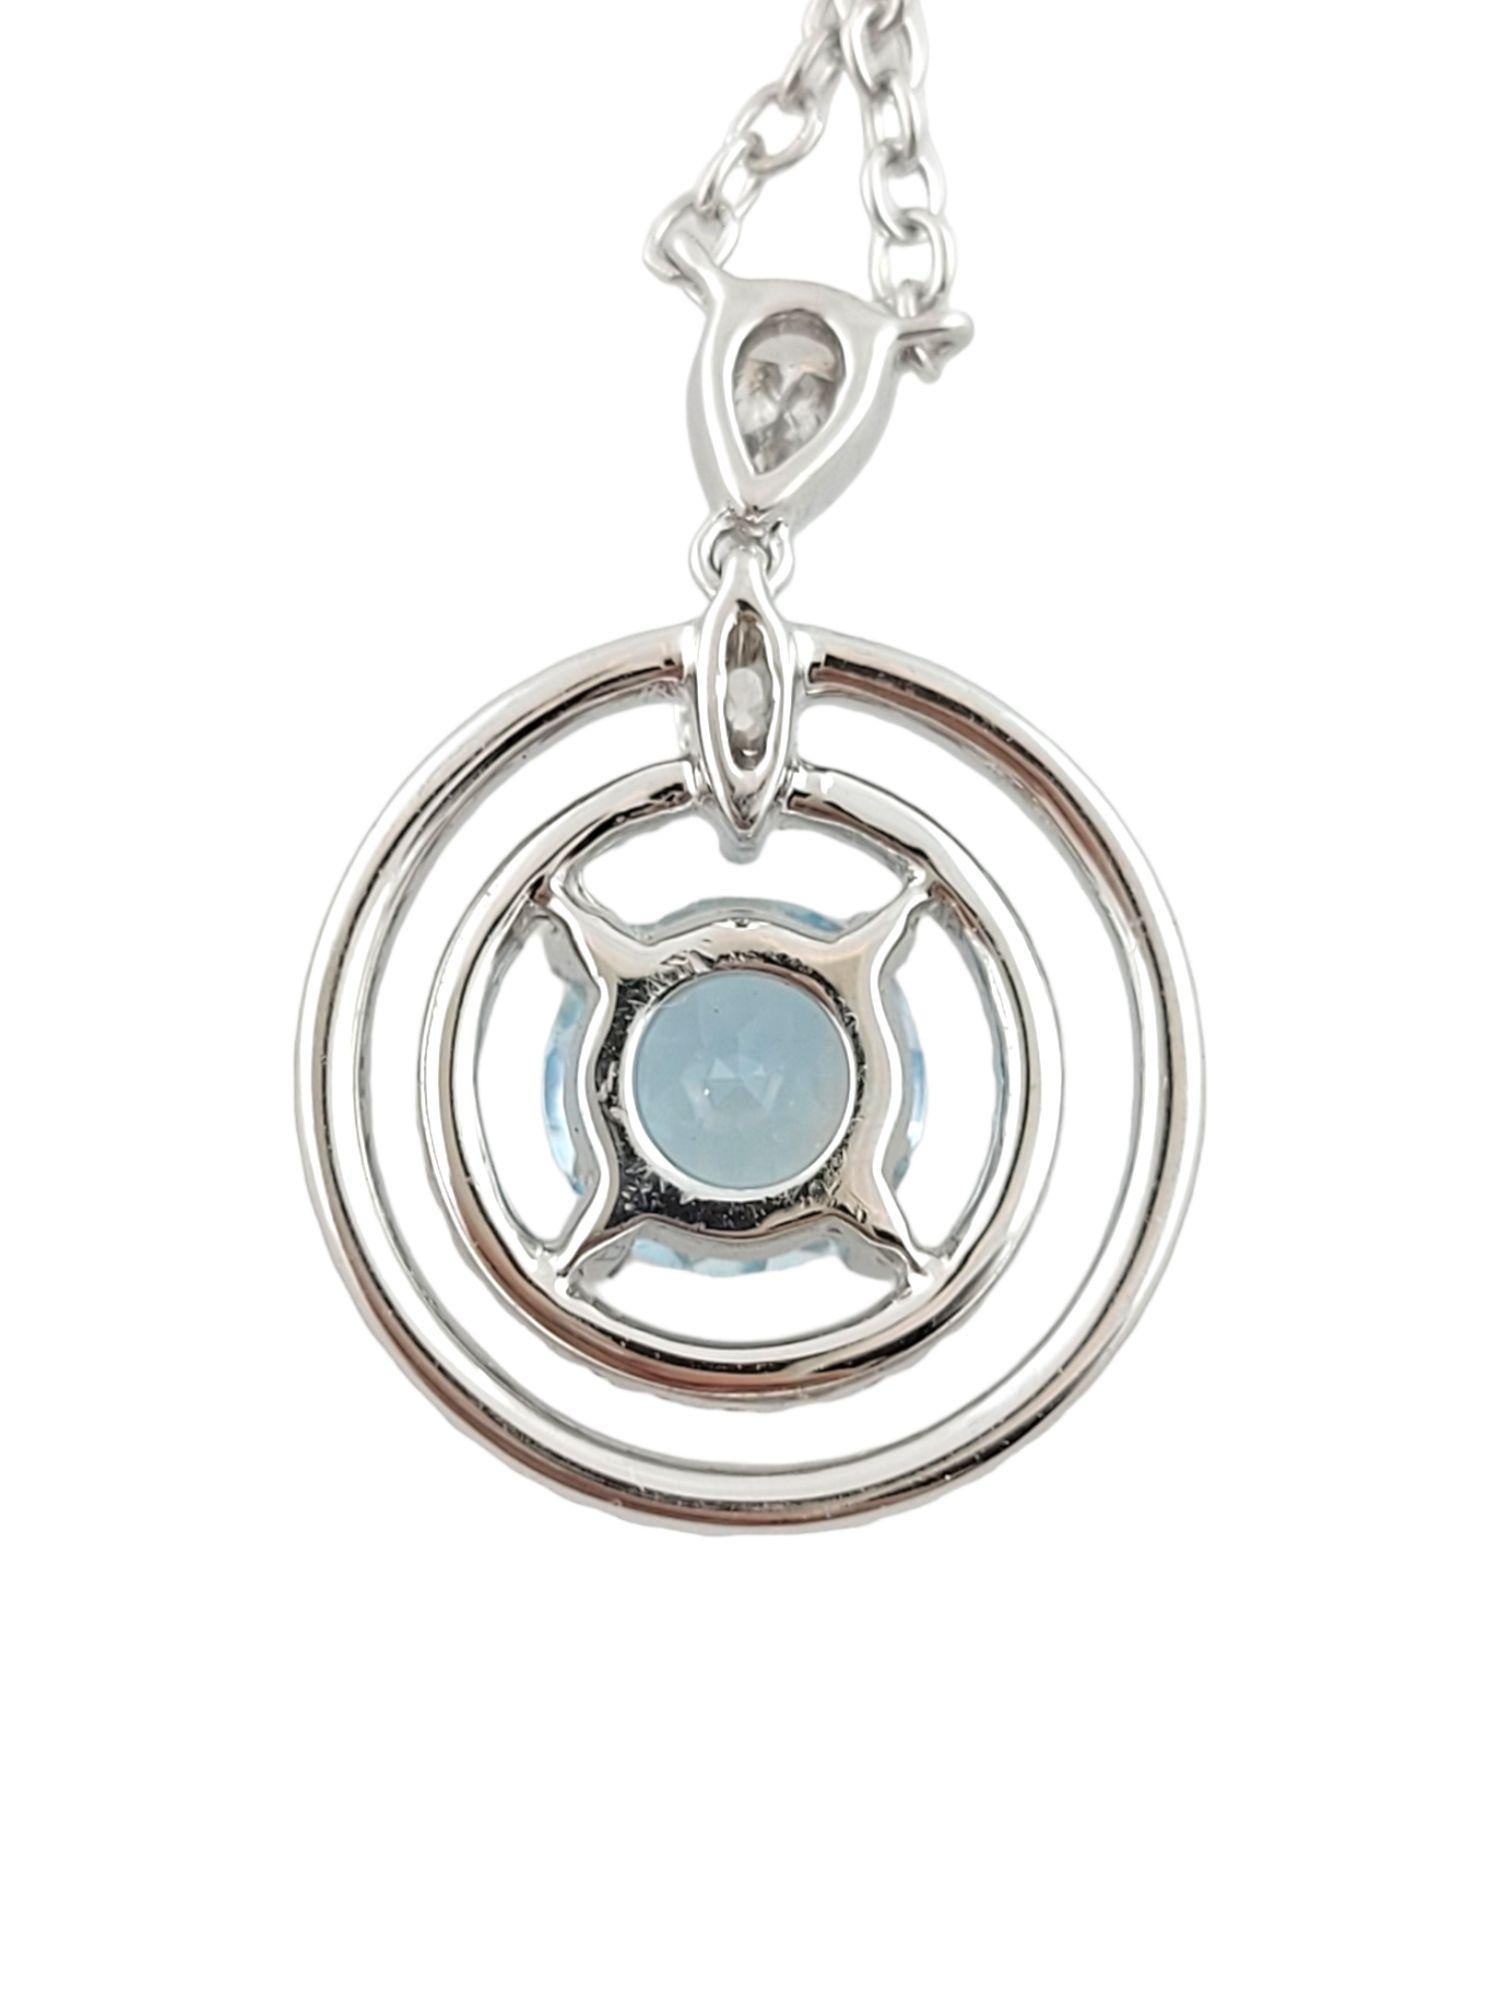 18K White Gold Aquamarine and Diamond Pendant Necklace #14748 In Good Condition For Sale In Washington Depot, CT